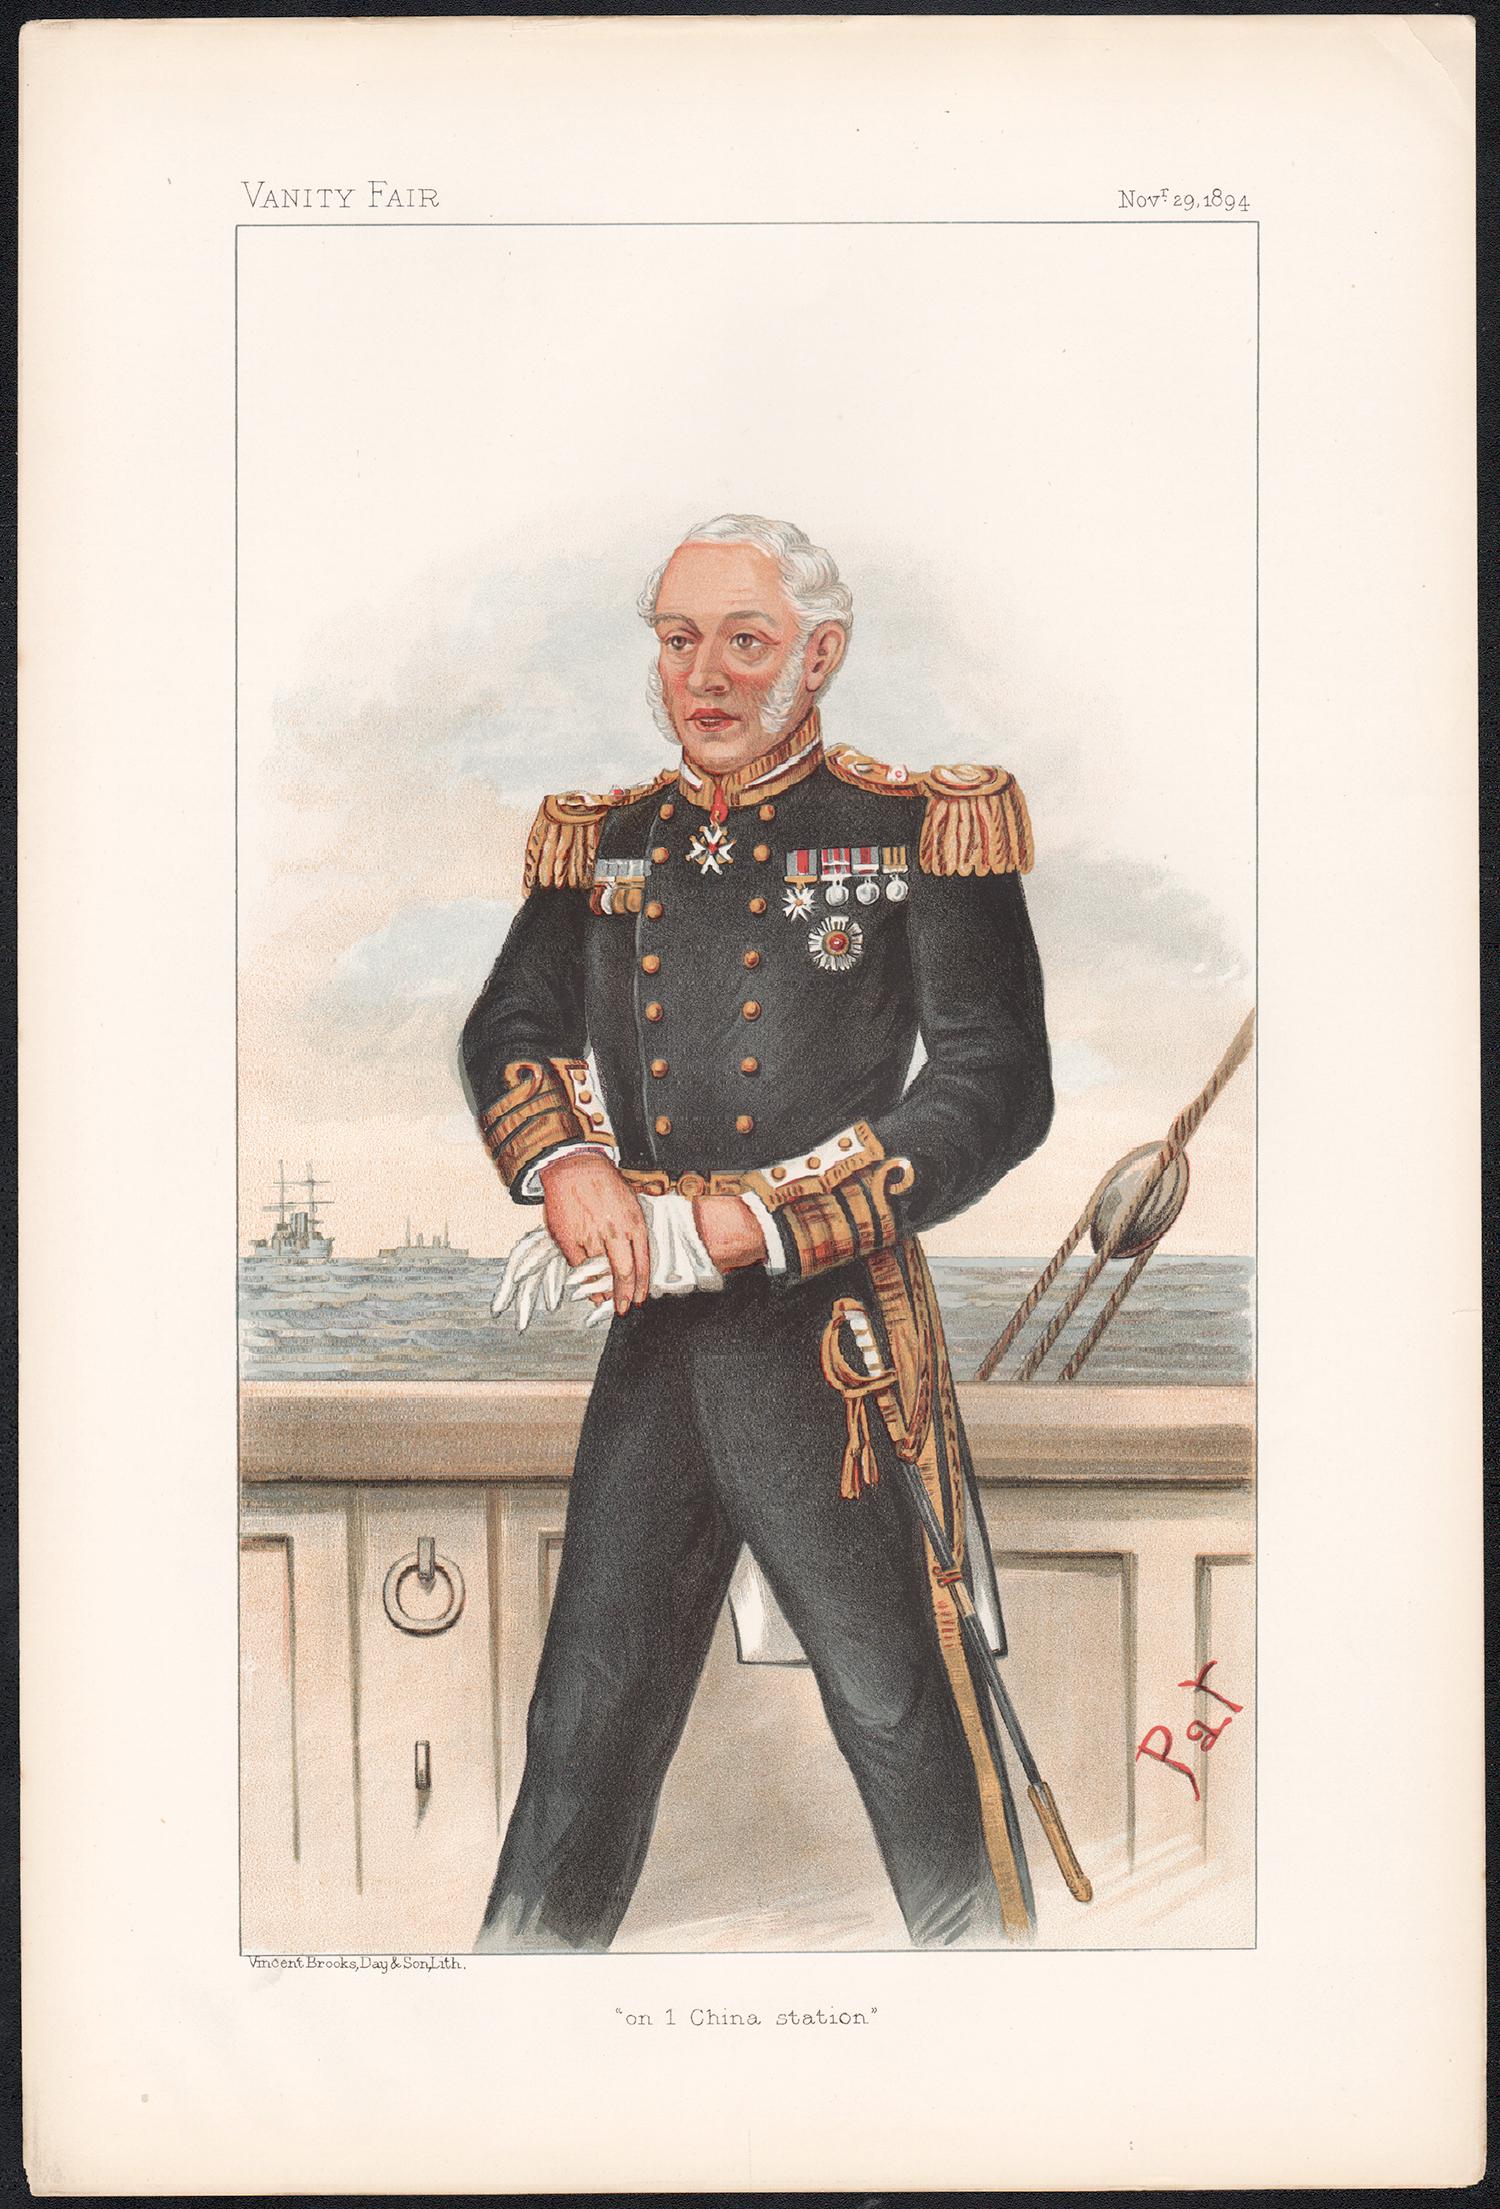 'on 1 China station', Vanity Fair naval portrait chromolithograph, 1894 - Print by Unknown